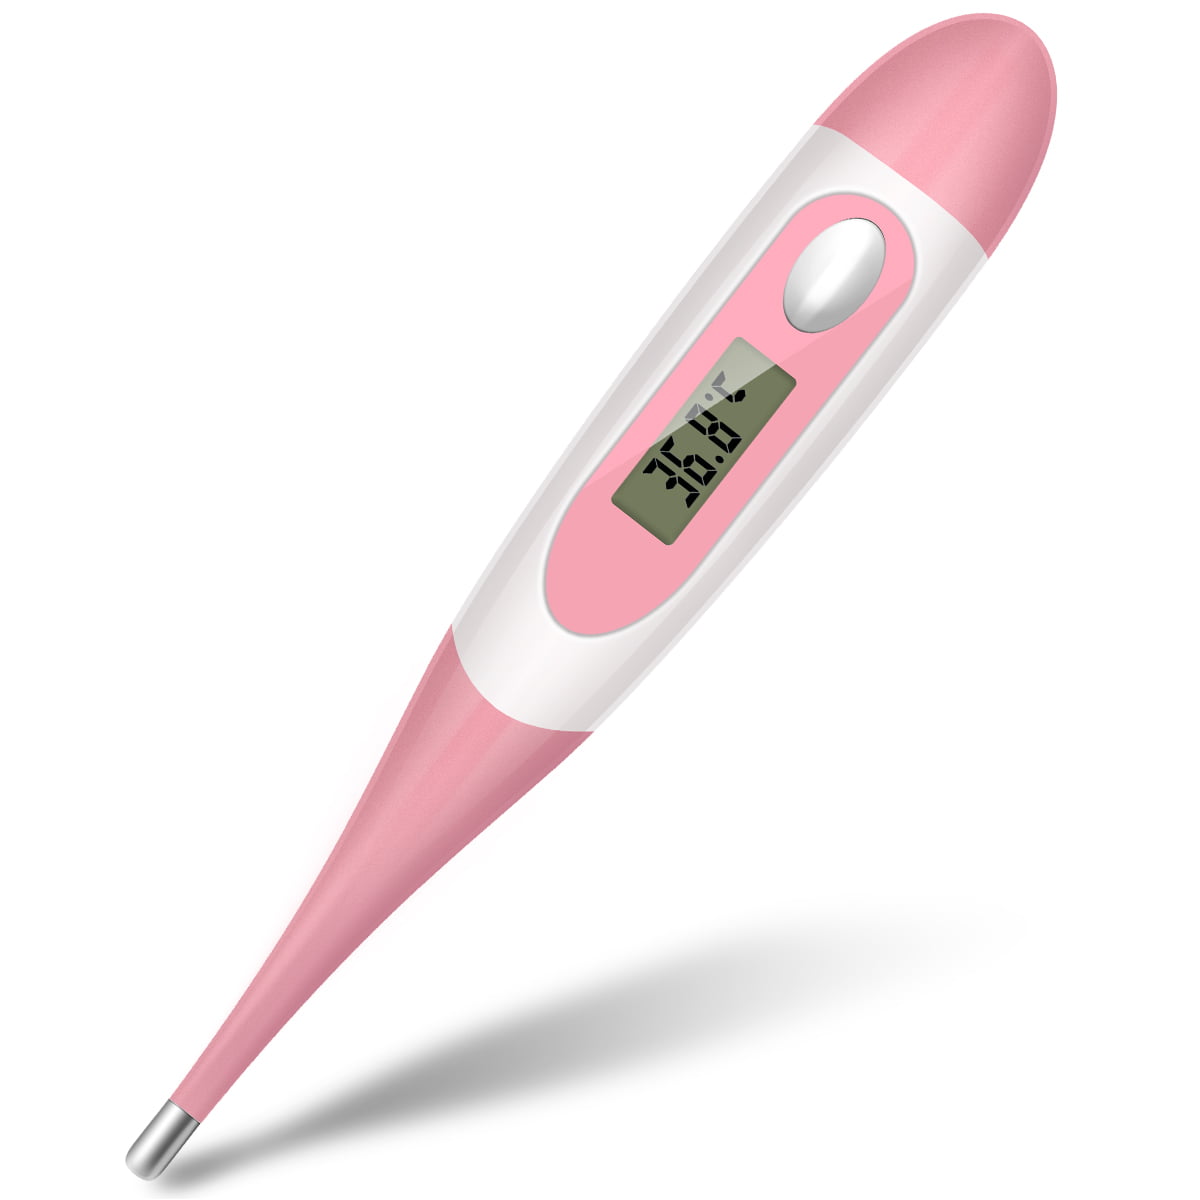 The tip of the thermometer must stay covered by skin. 